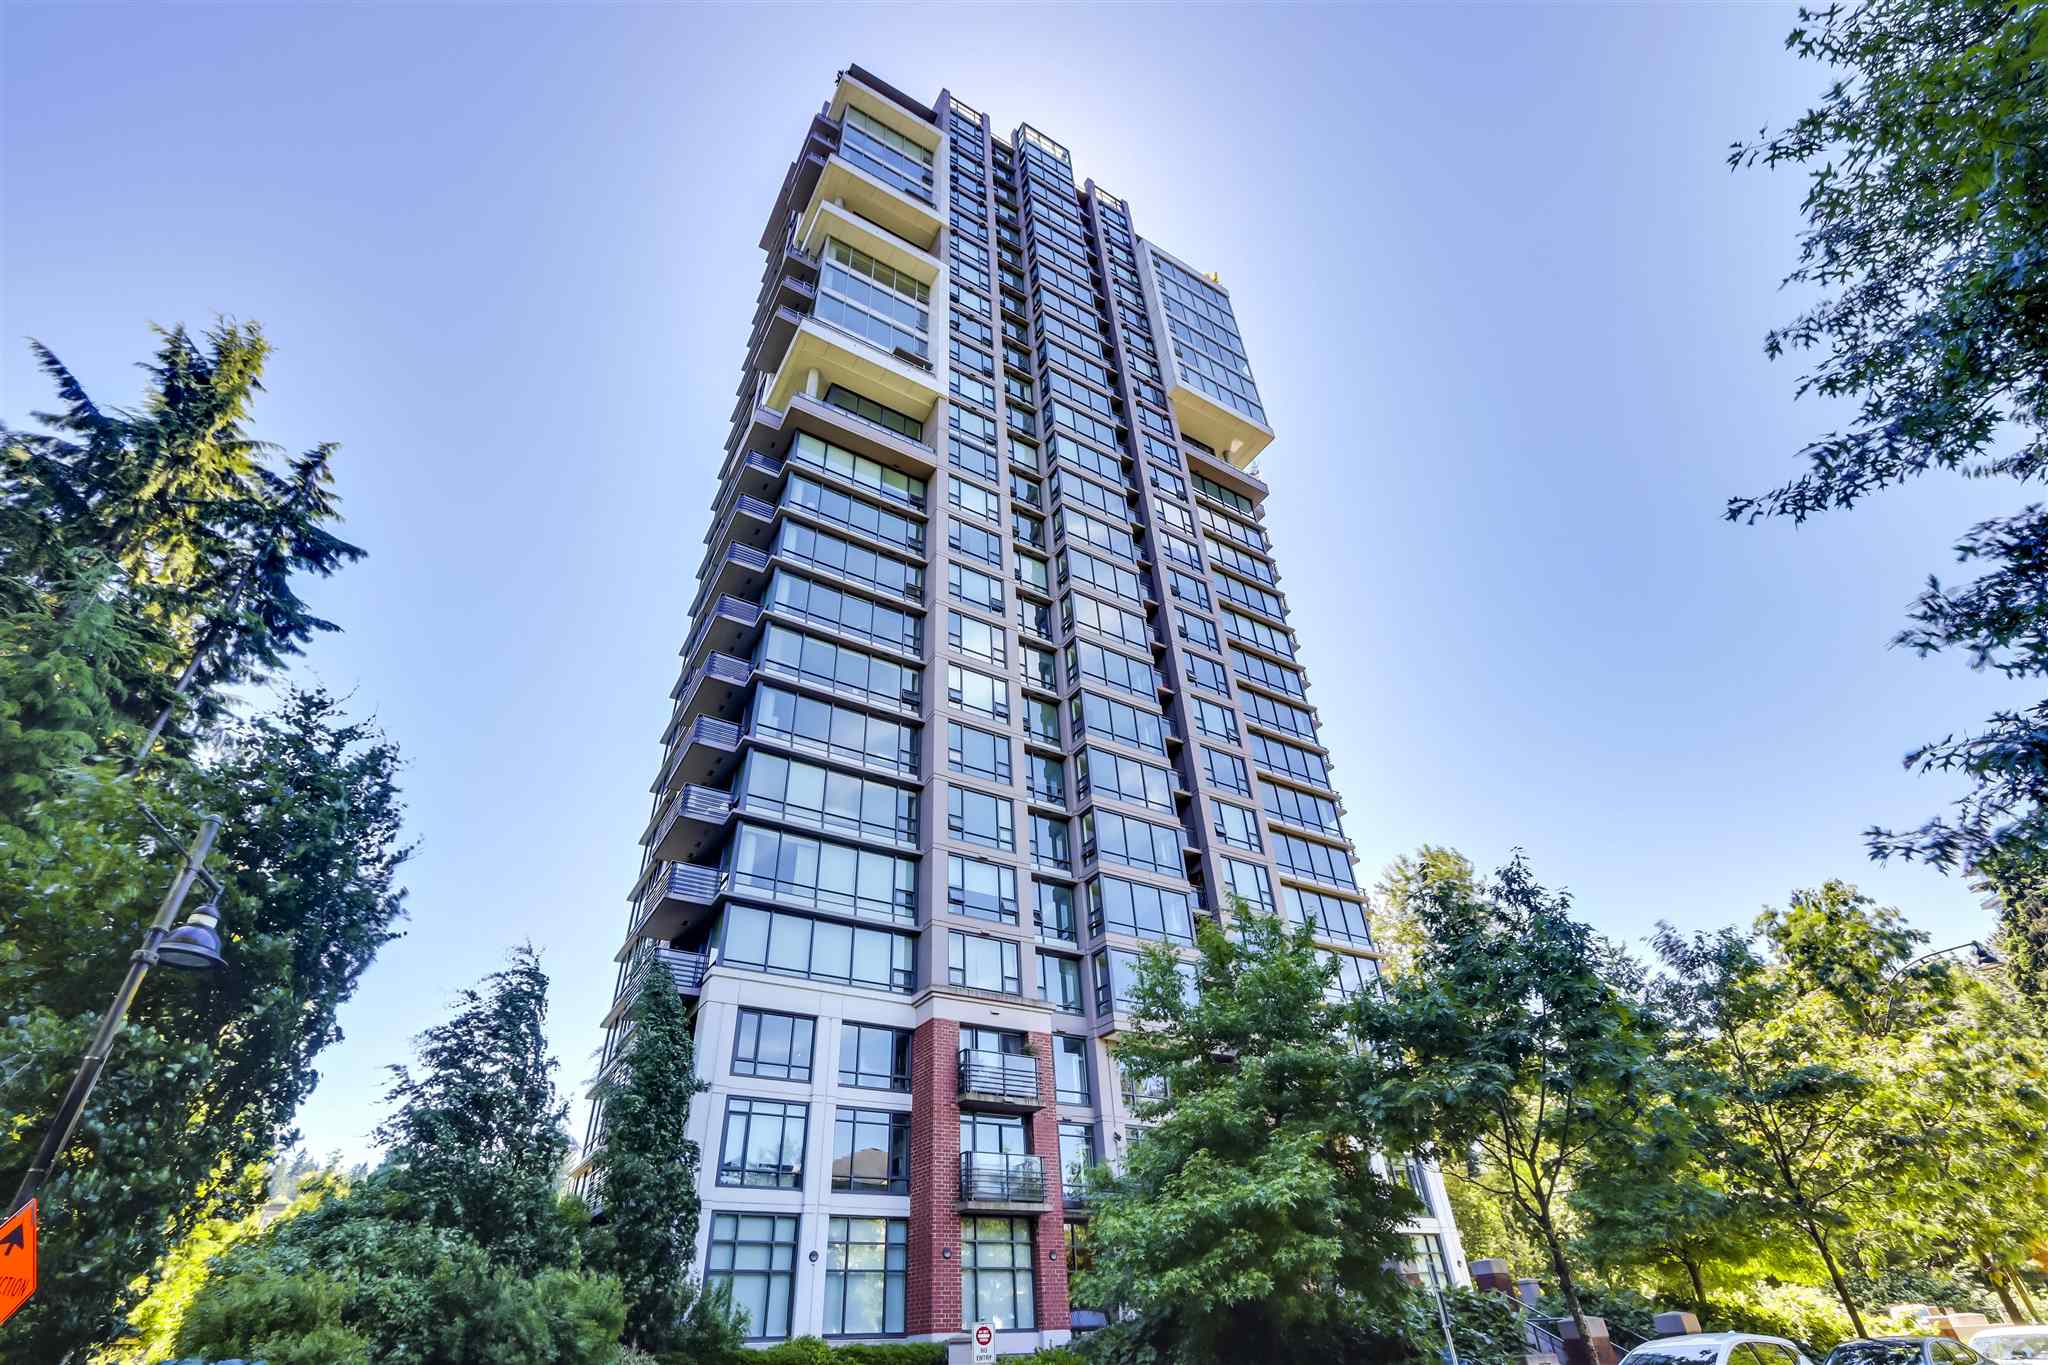 Suter Brook Two Bedroom Condos for Sale - Great Port Moody, BC location